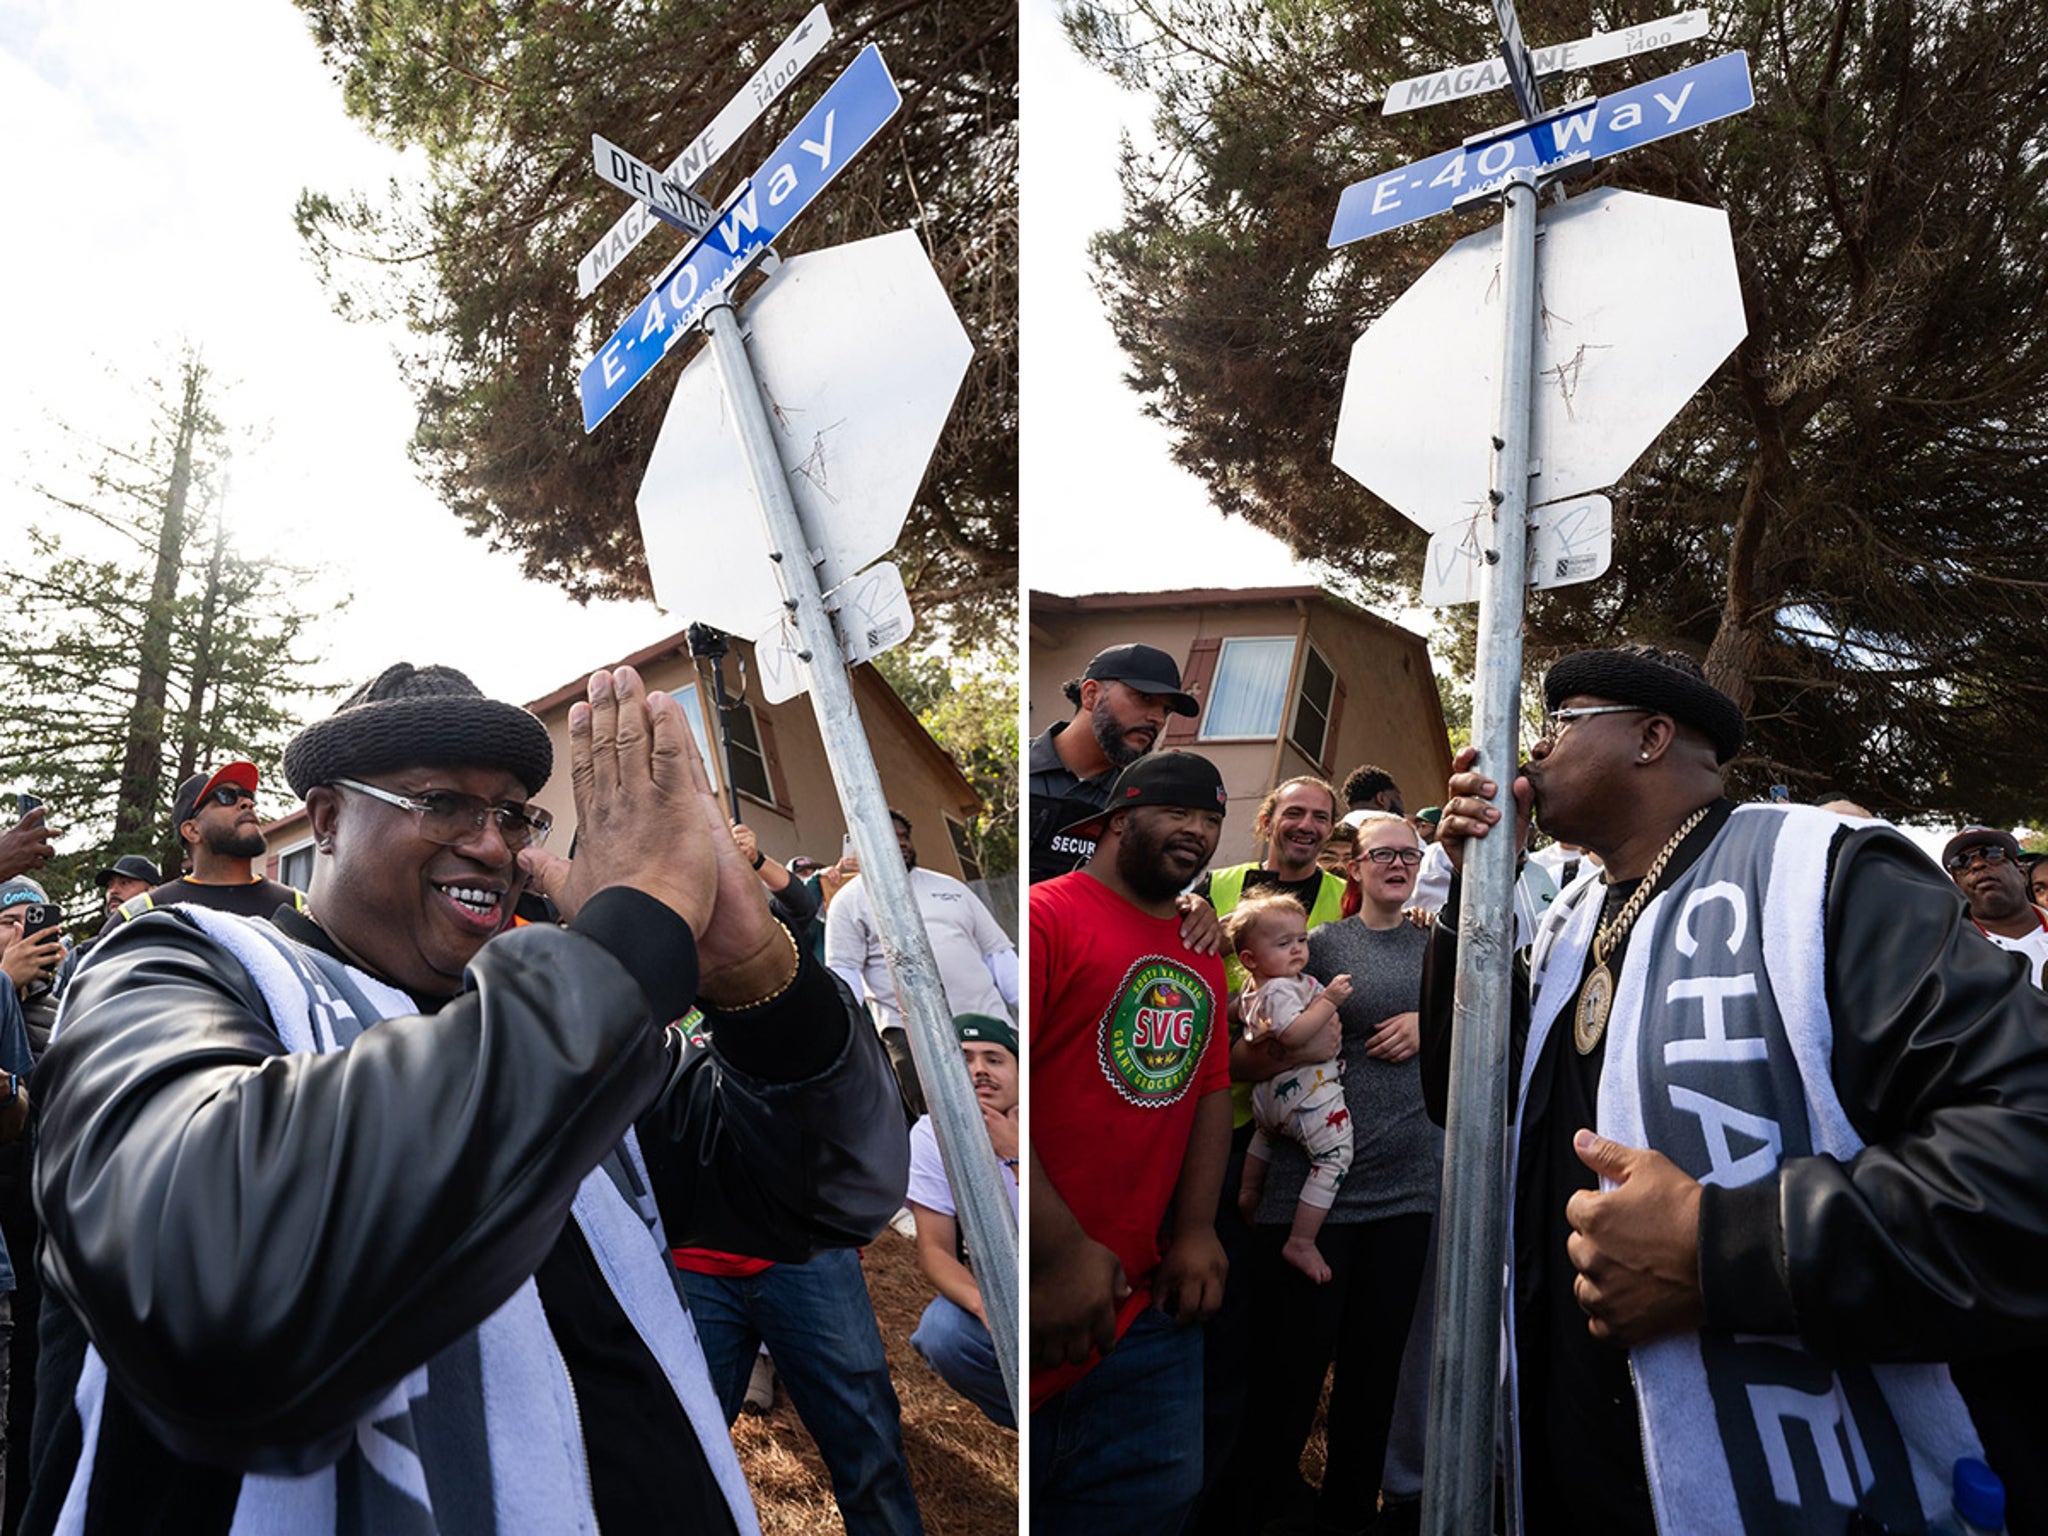 E-40 to be honored with street named after him in Vallejo - ABC7